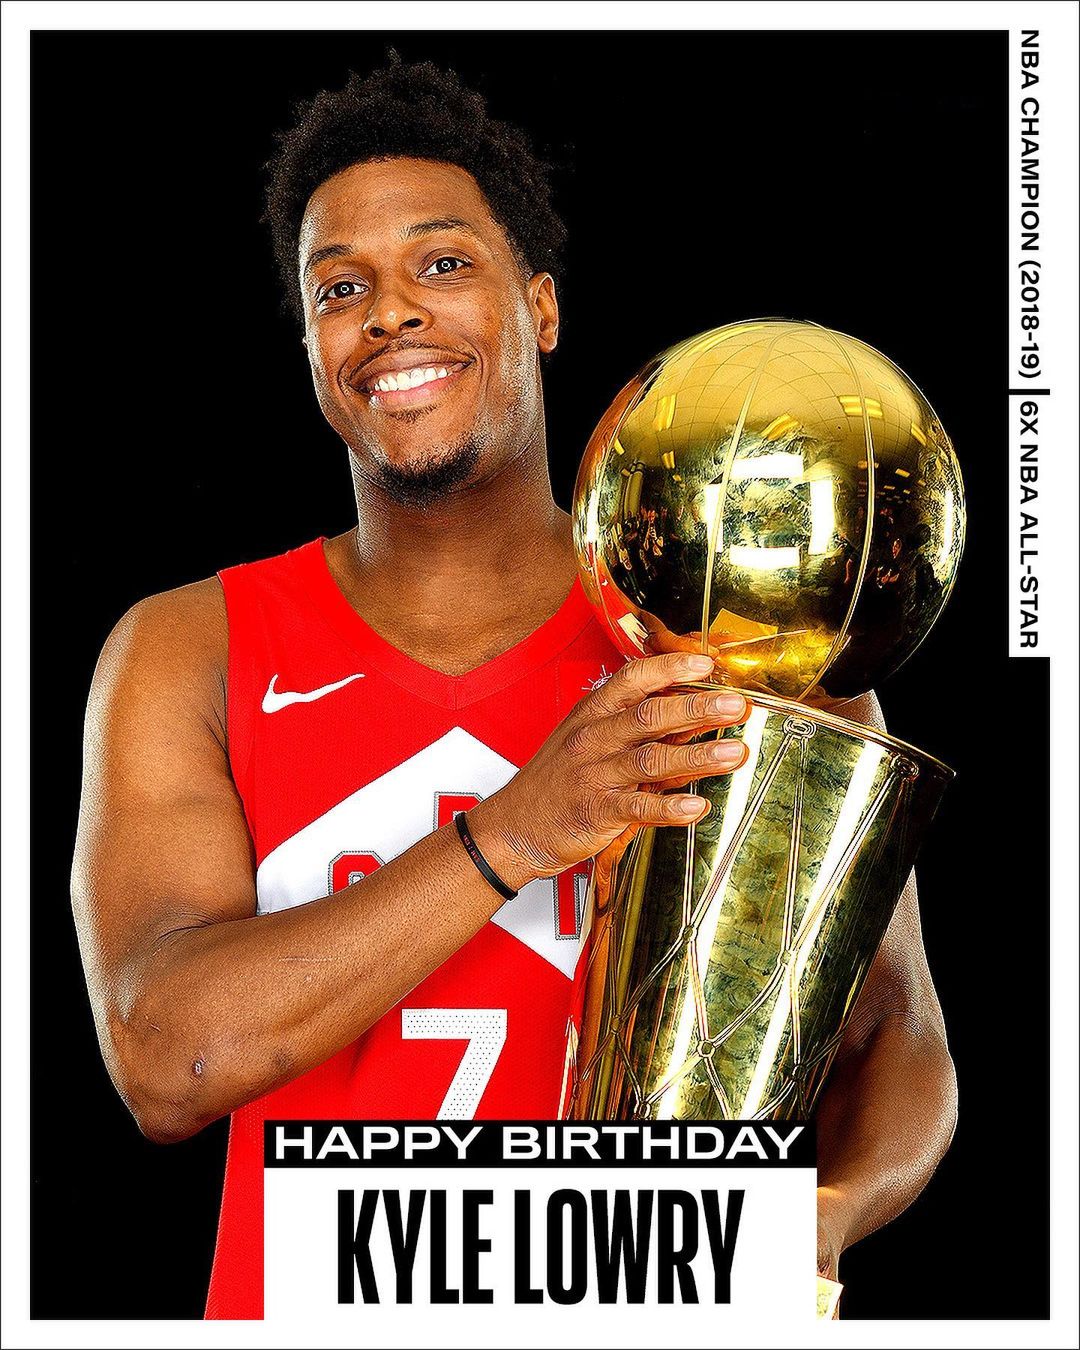 Join us in wishing @kyle_lowry7 of the @miamiheat a HAPPY 36th BIRTHDAY! #NBABDA...